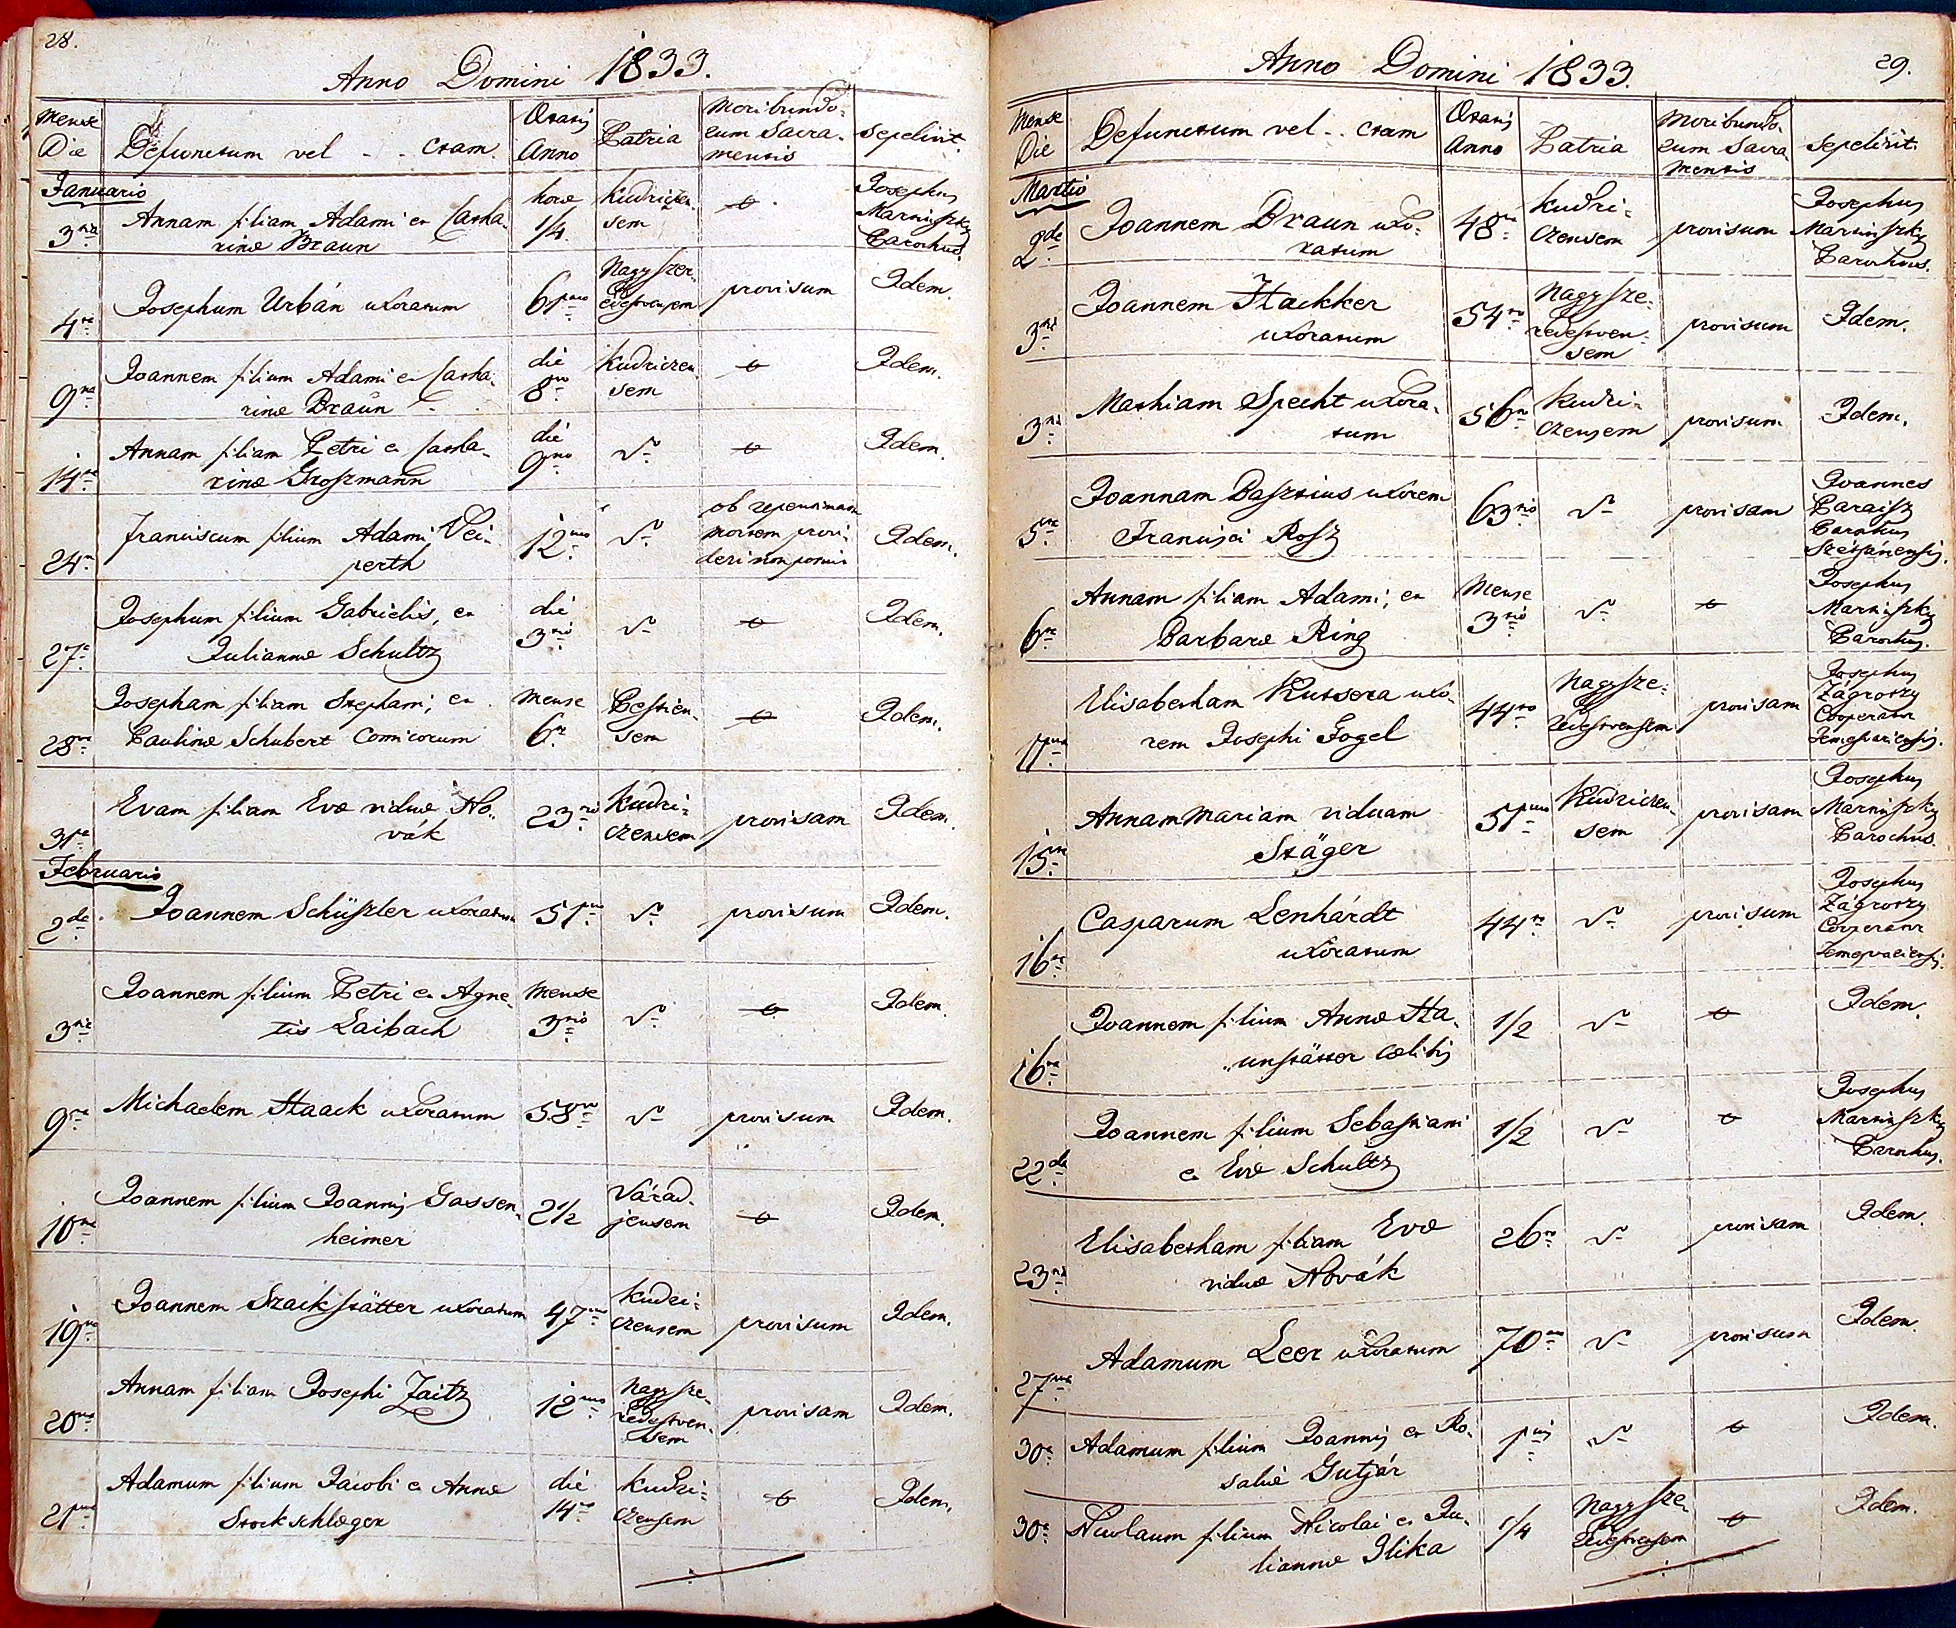 images/church_records/DEATHS/1742-1775D/028 i 029